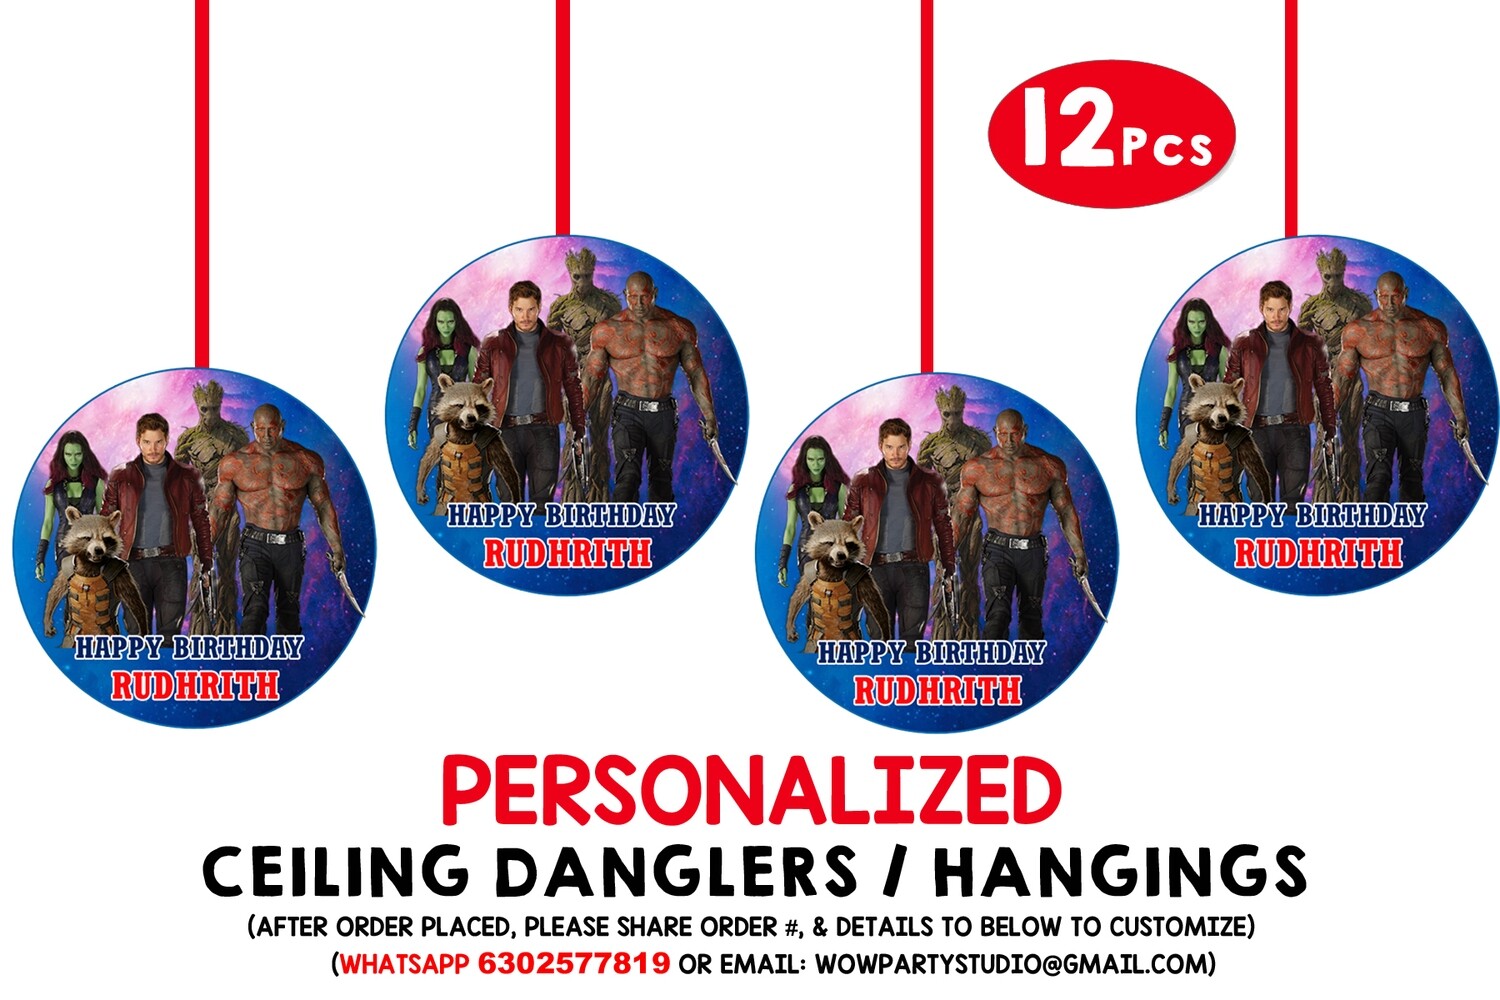 Guardians Of The Galaxy Ceiling Hangings / Danglers (12 Pcs)